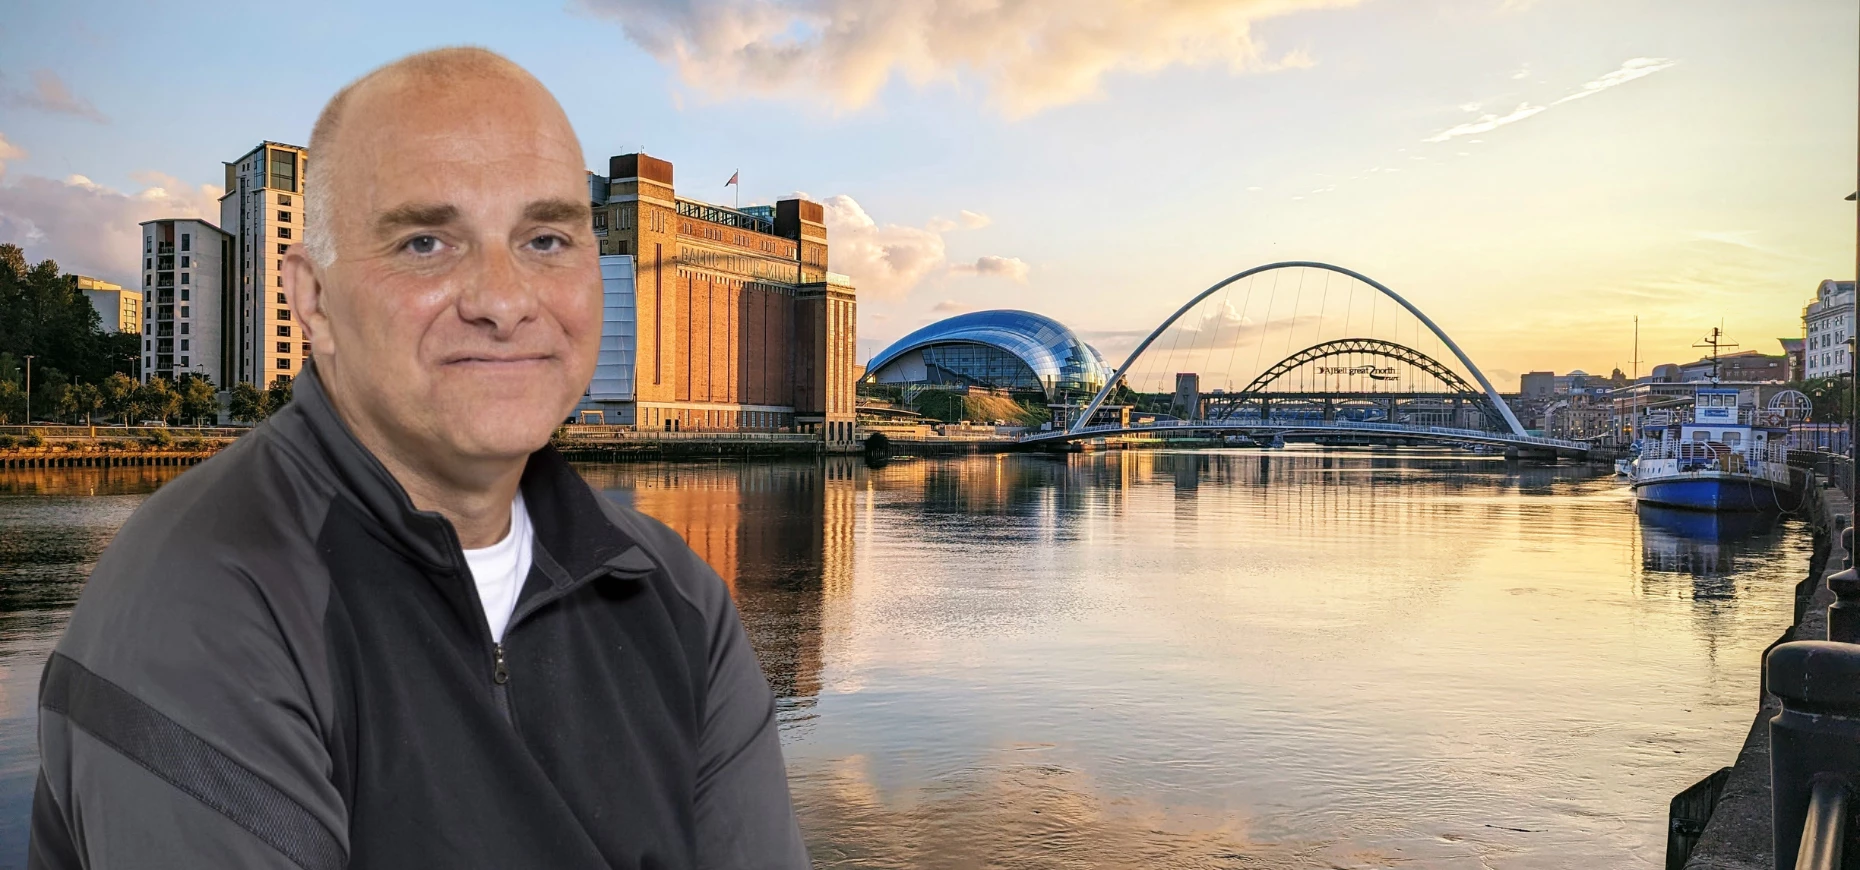 Muckle LLP managing Partner Jason Wainwright in front of the Tyne river.